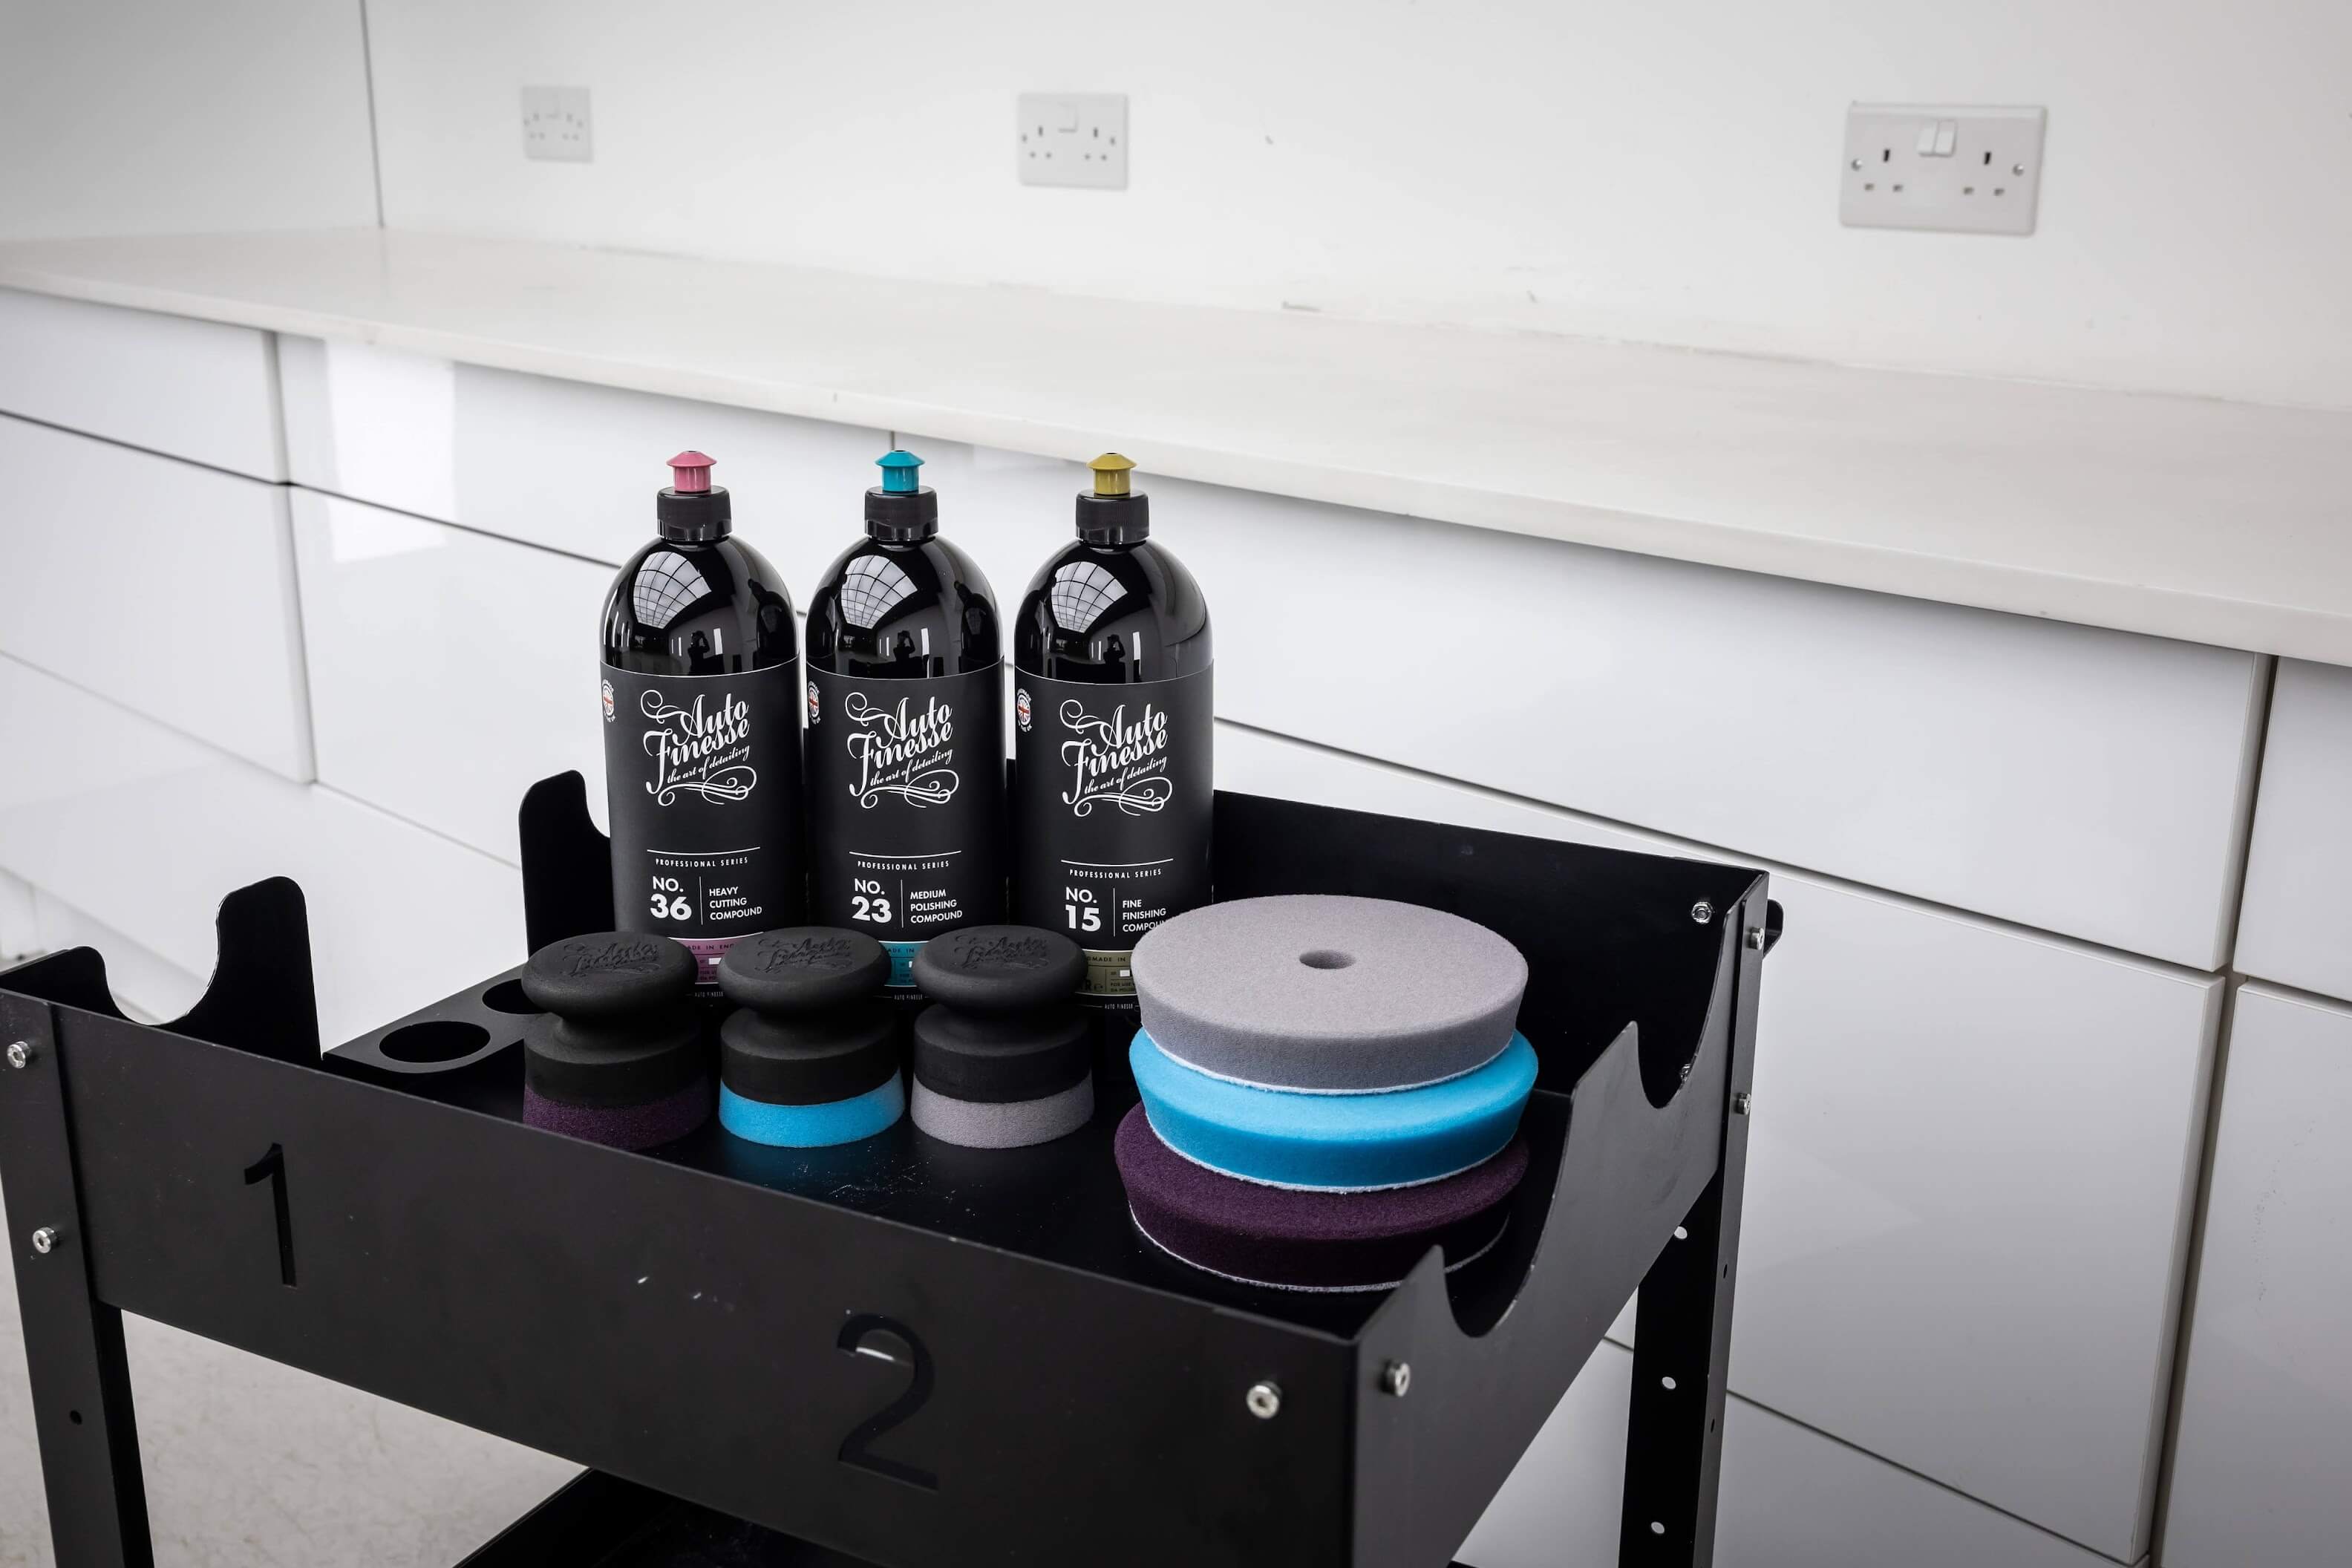 Auto Finesse | Professional Polishing Kit - Achieve Results Of The Highest Professional Standard